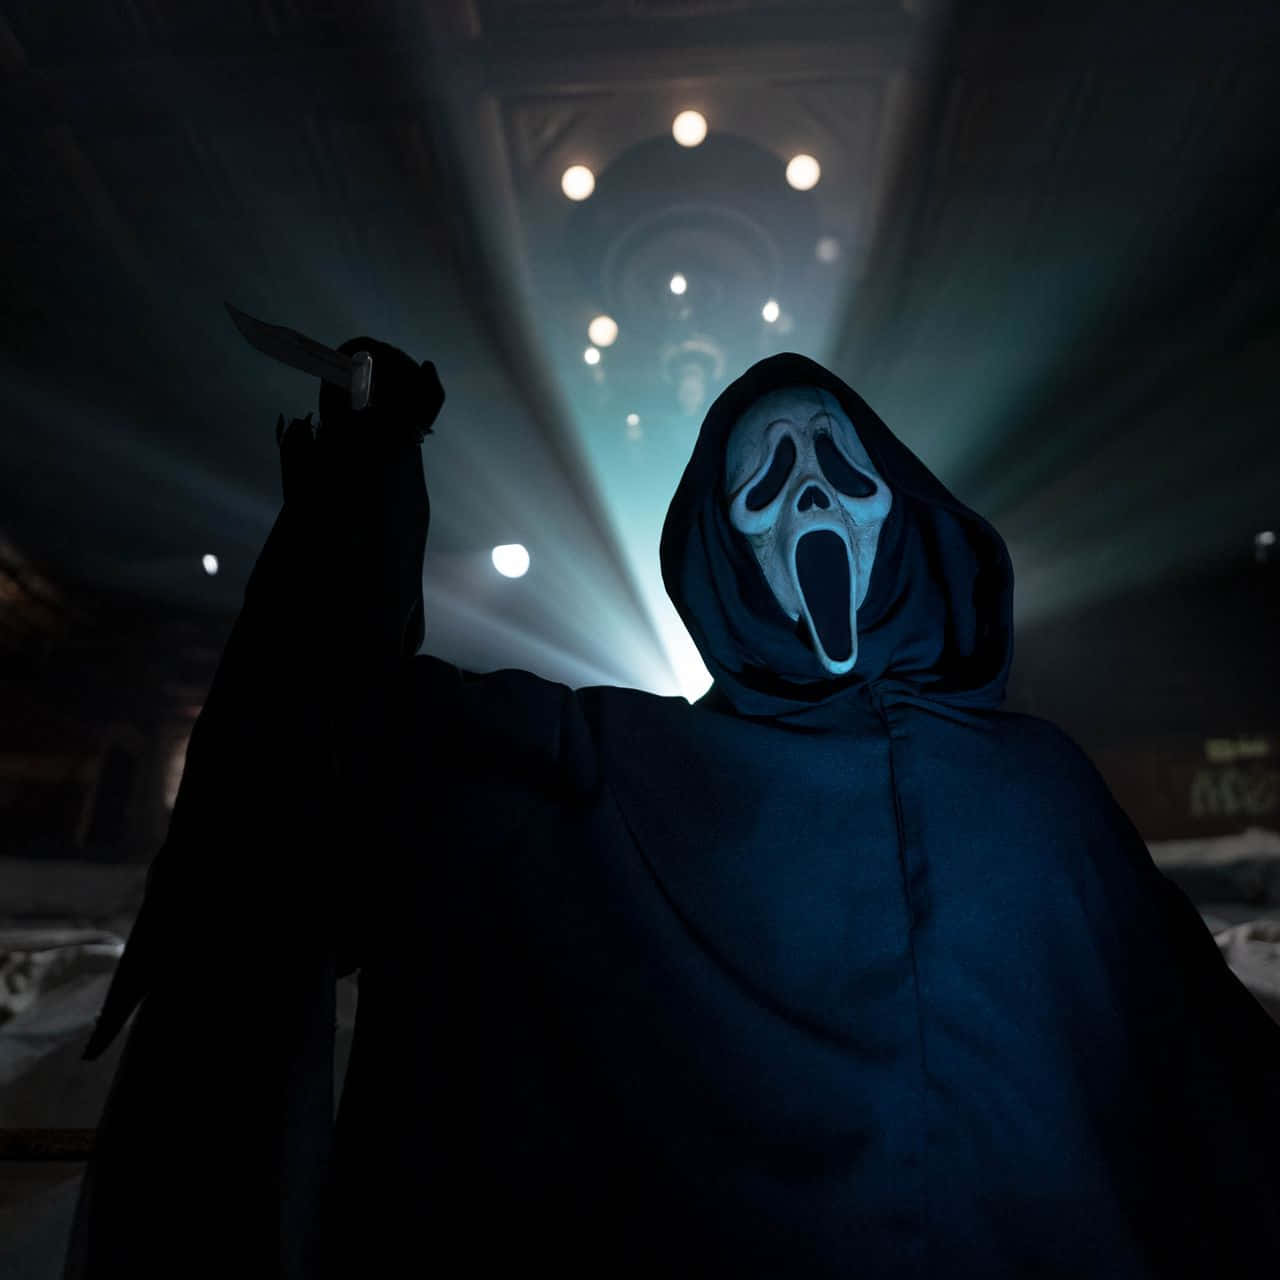 "The Iconic Mask of Ghostface"